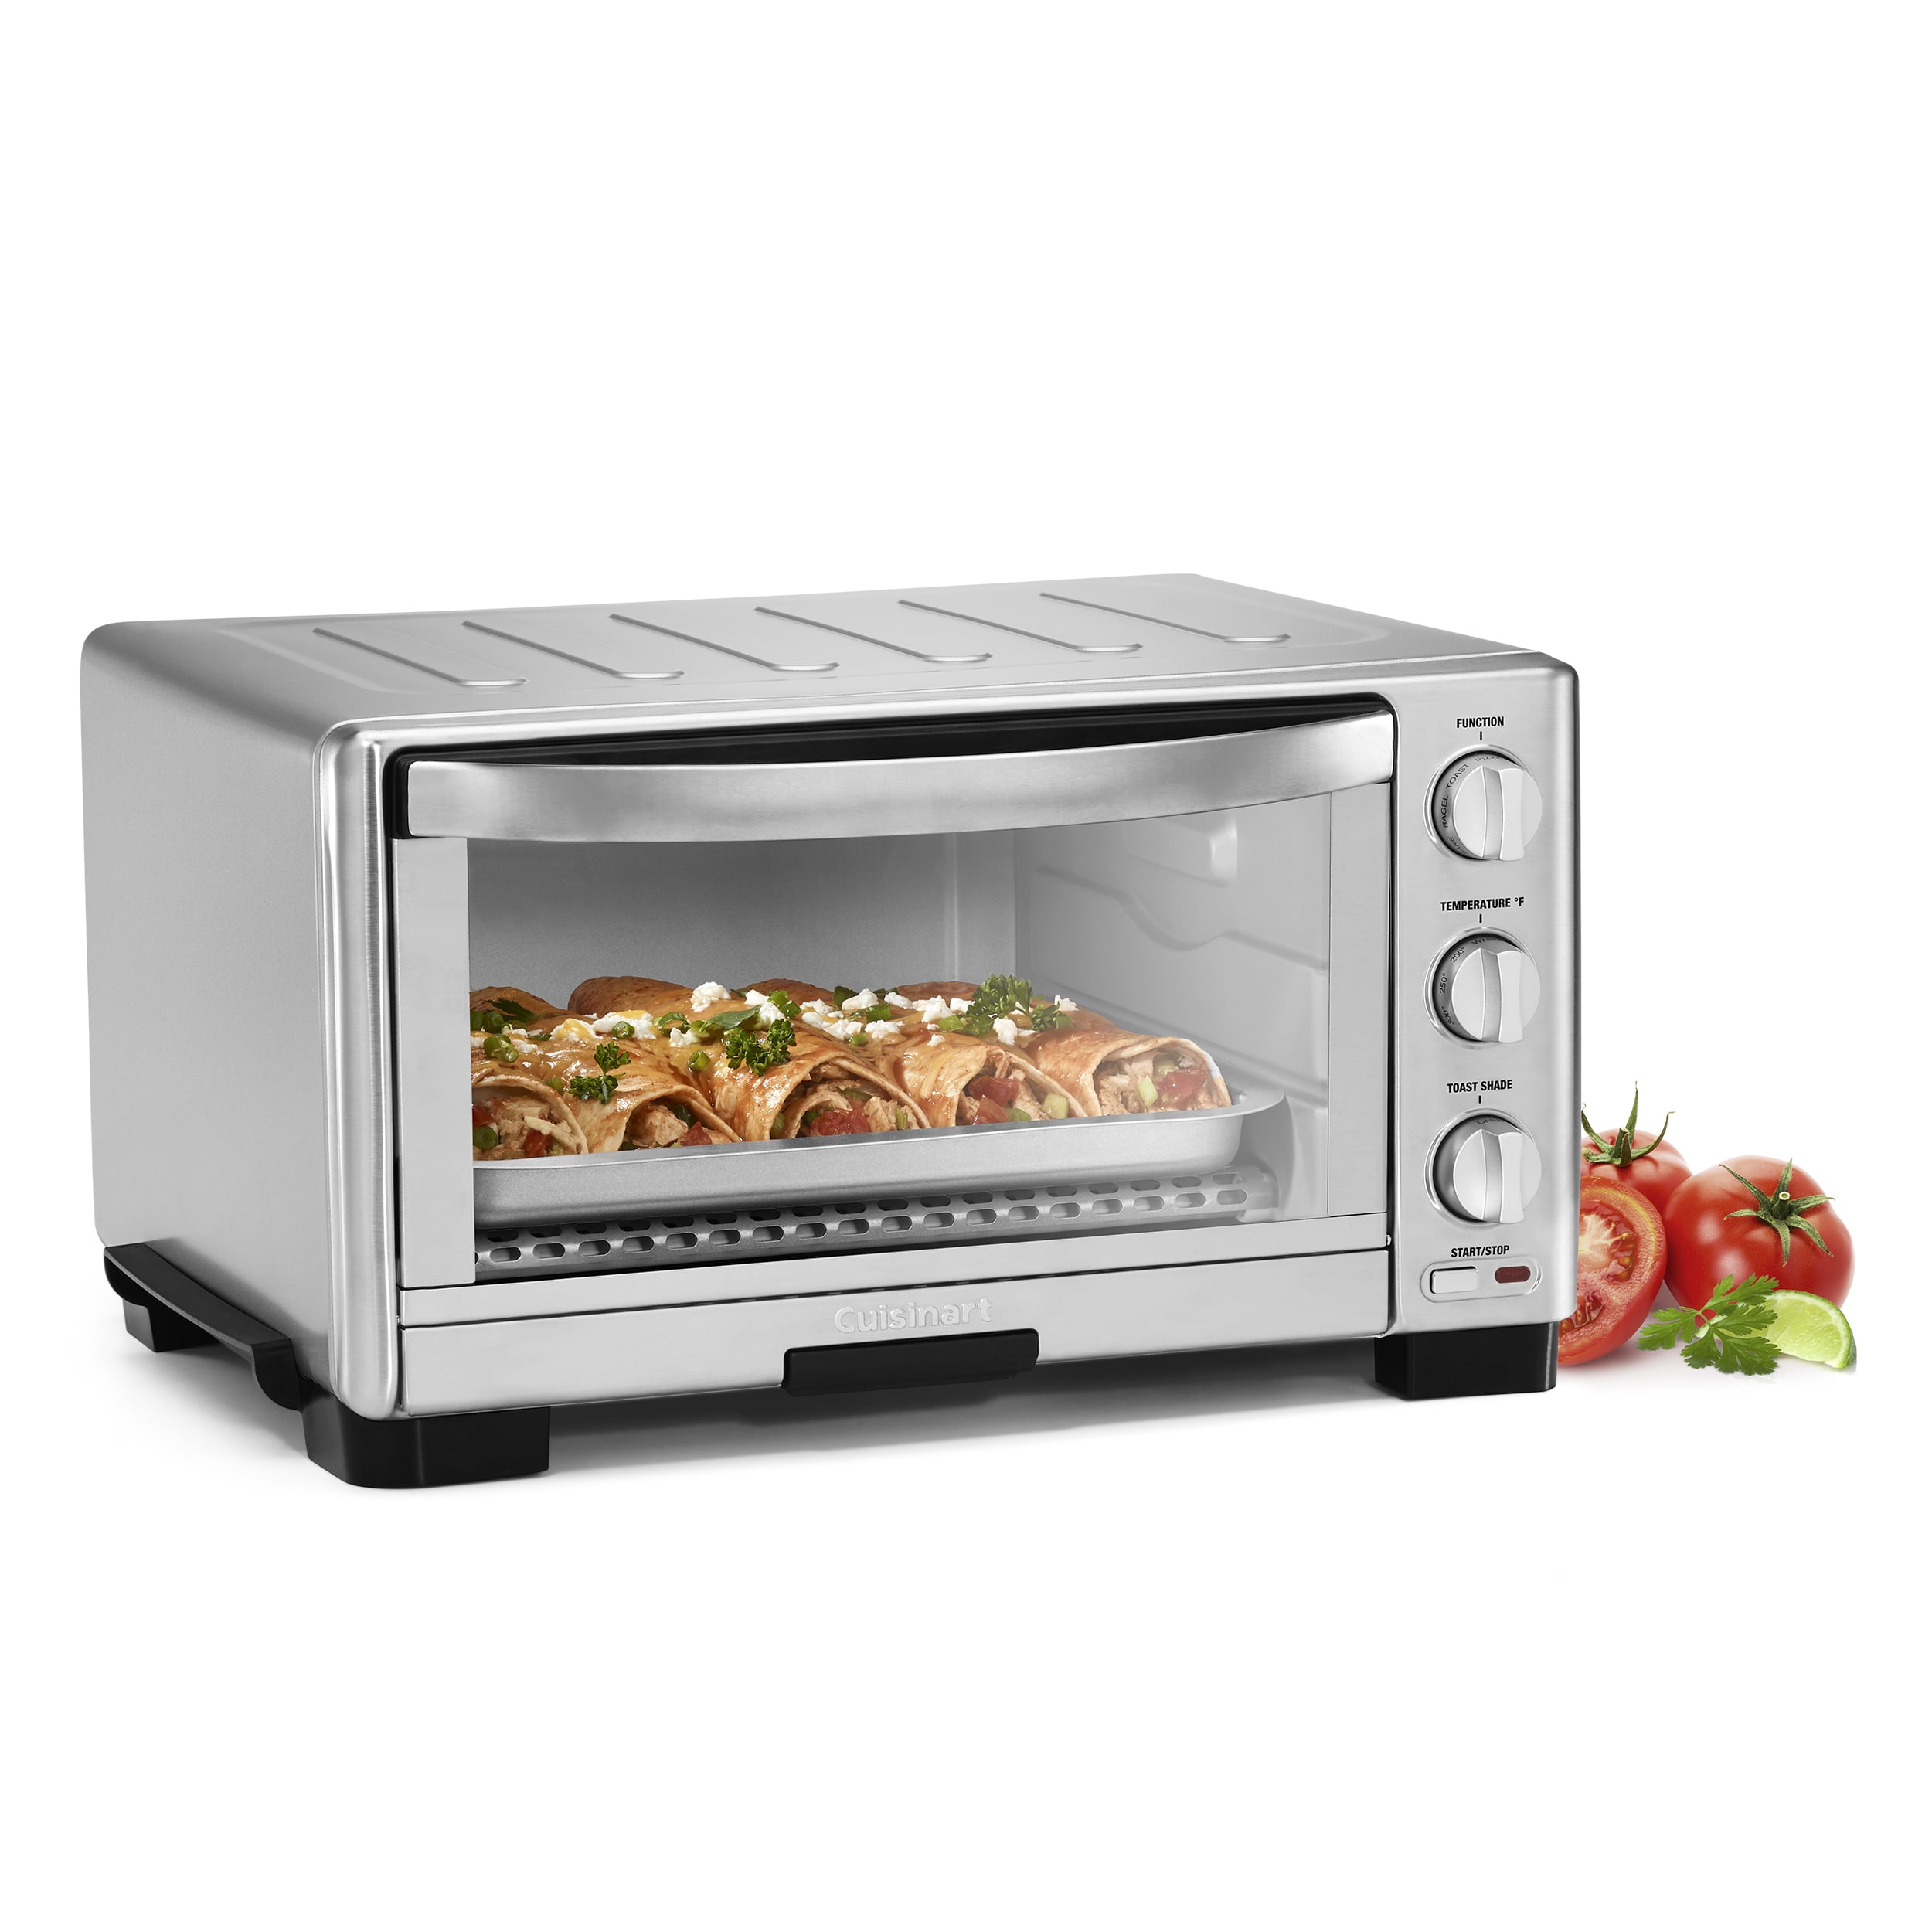 Cuisinart’s new toaster oven offers today’s home cooks superior performance...